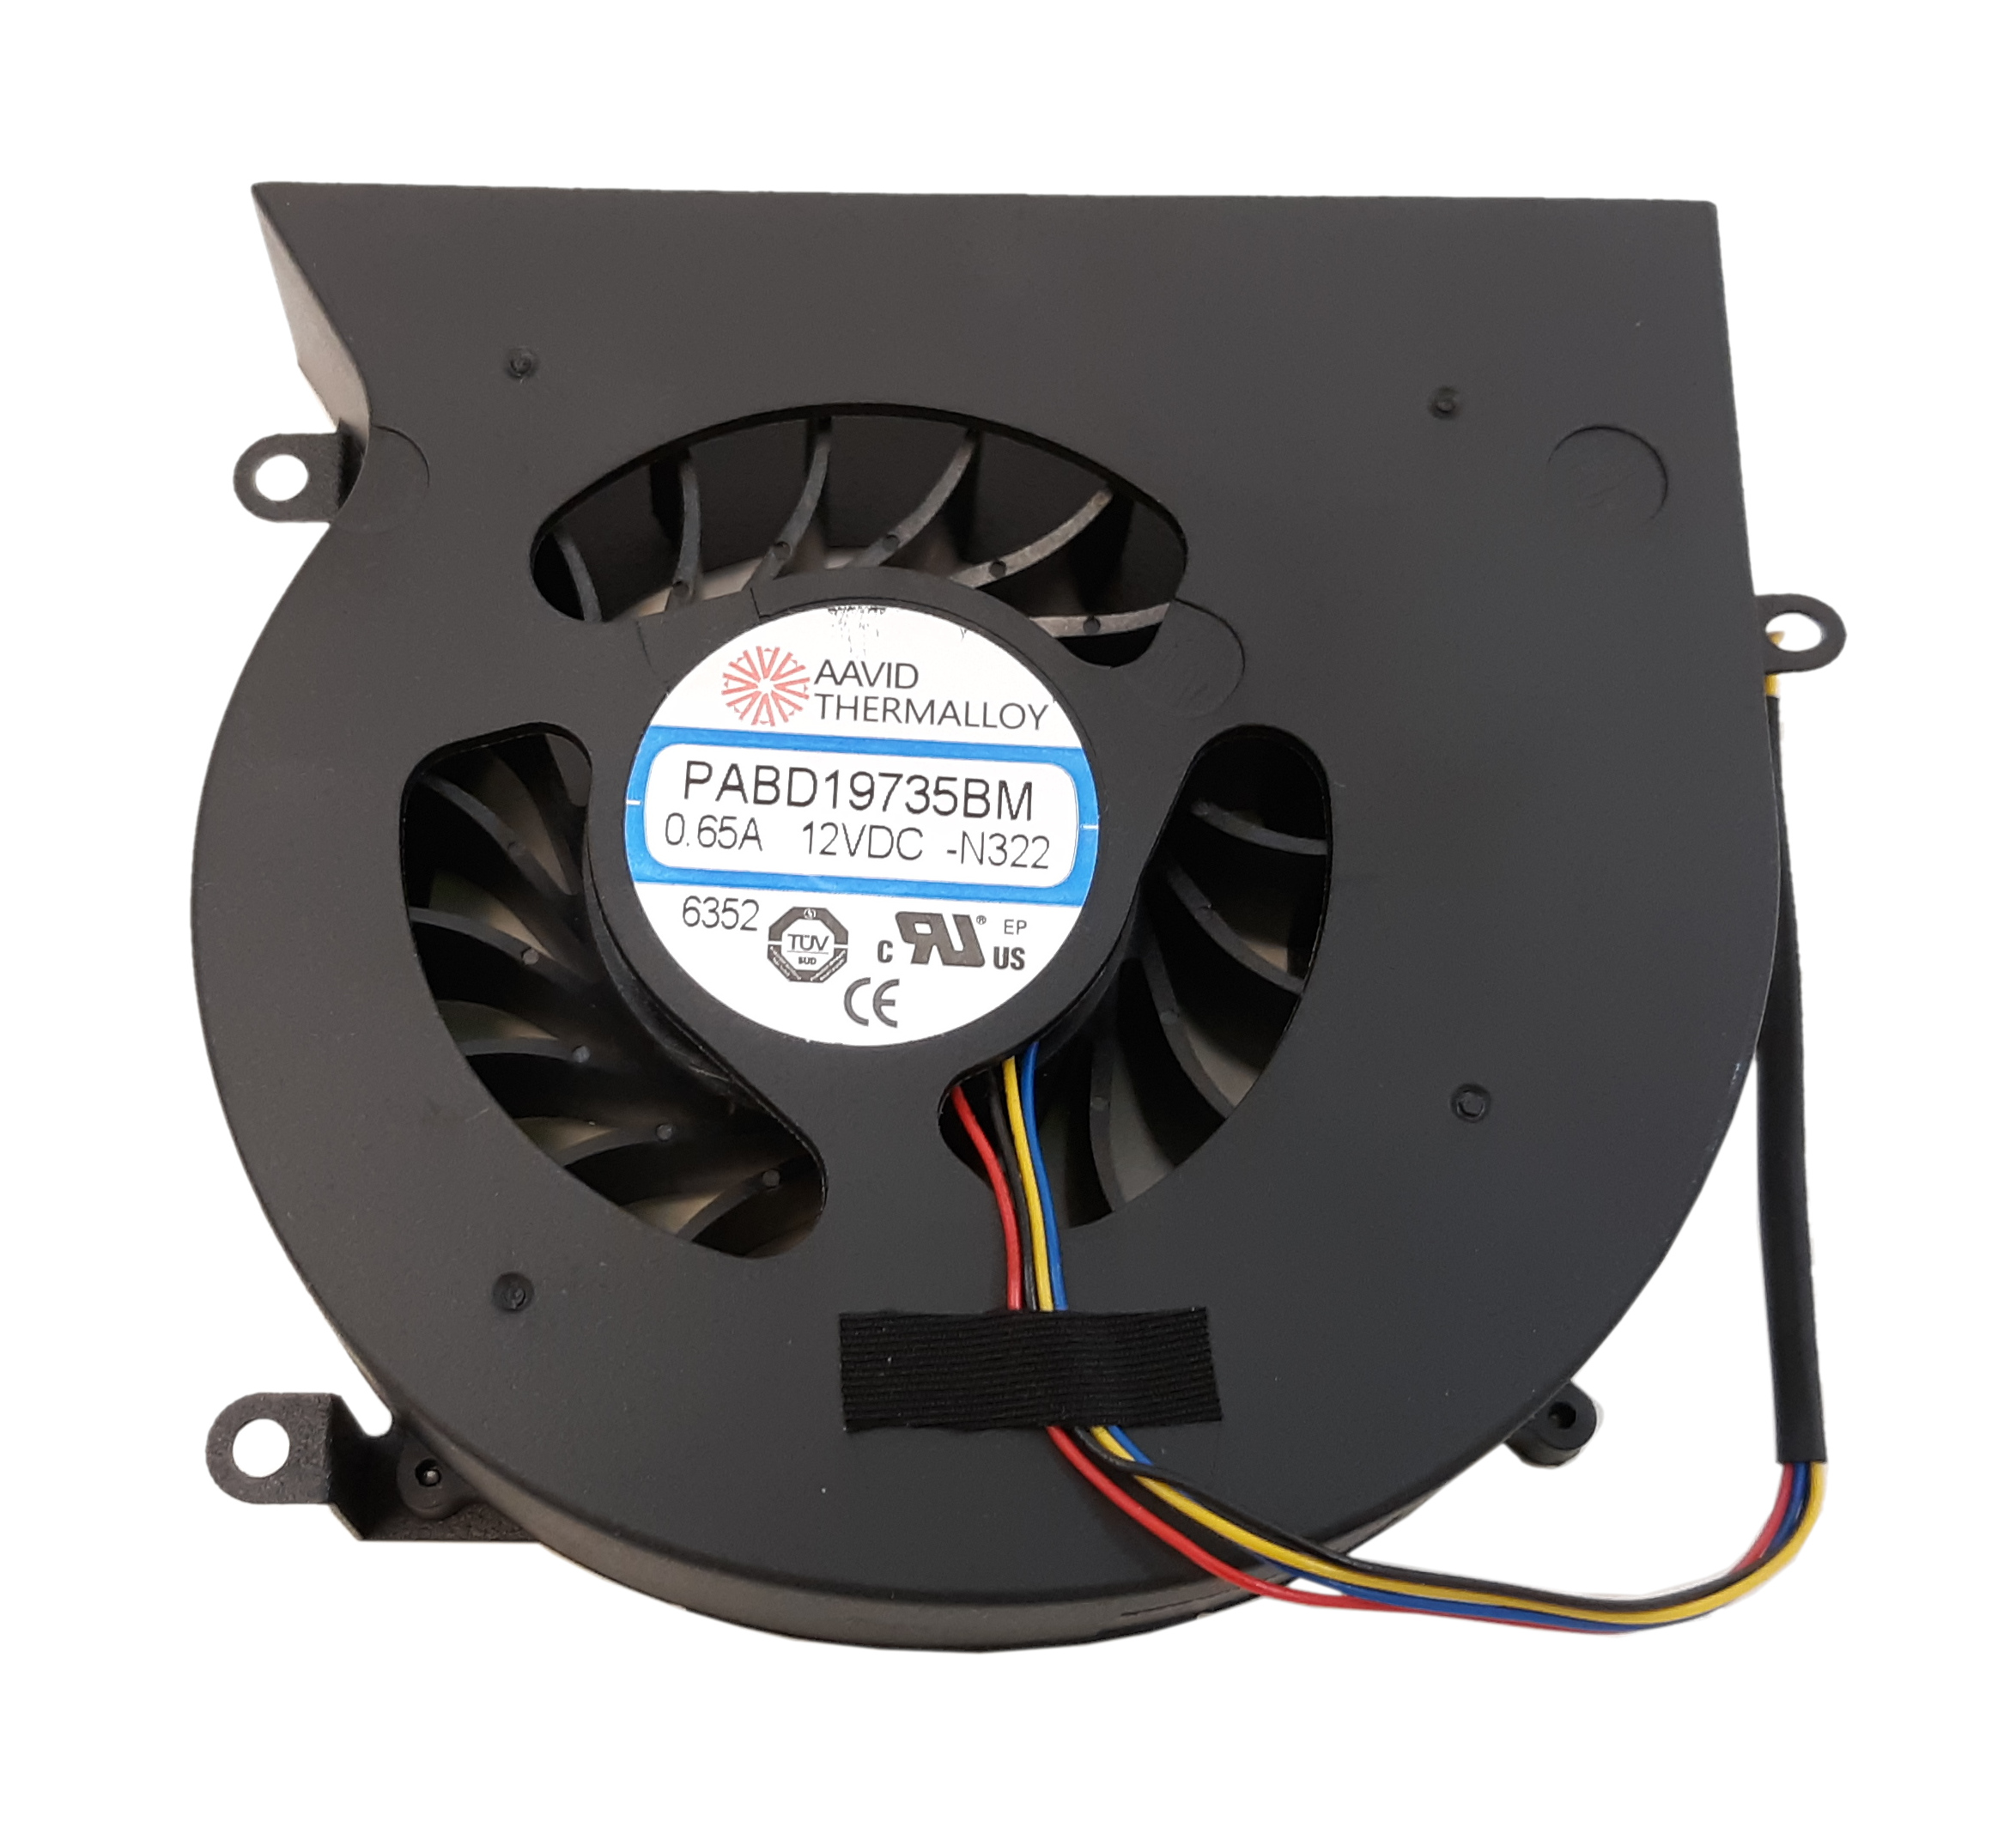 Aavid Thermalloy Laptop CPU Cooling Fan 4 Pin For MSI 0.65A 12VDC PABD19735BM N322 - Click Image to Close